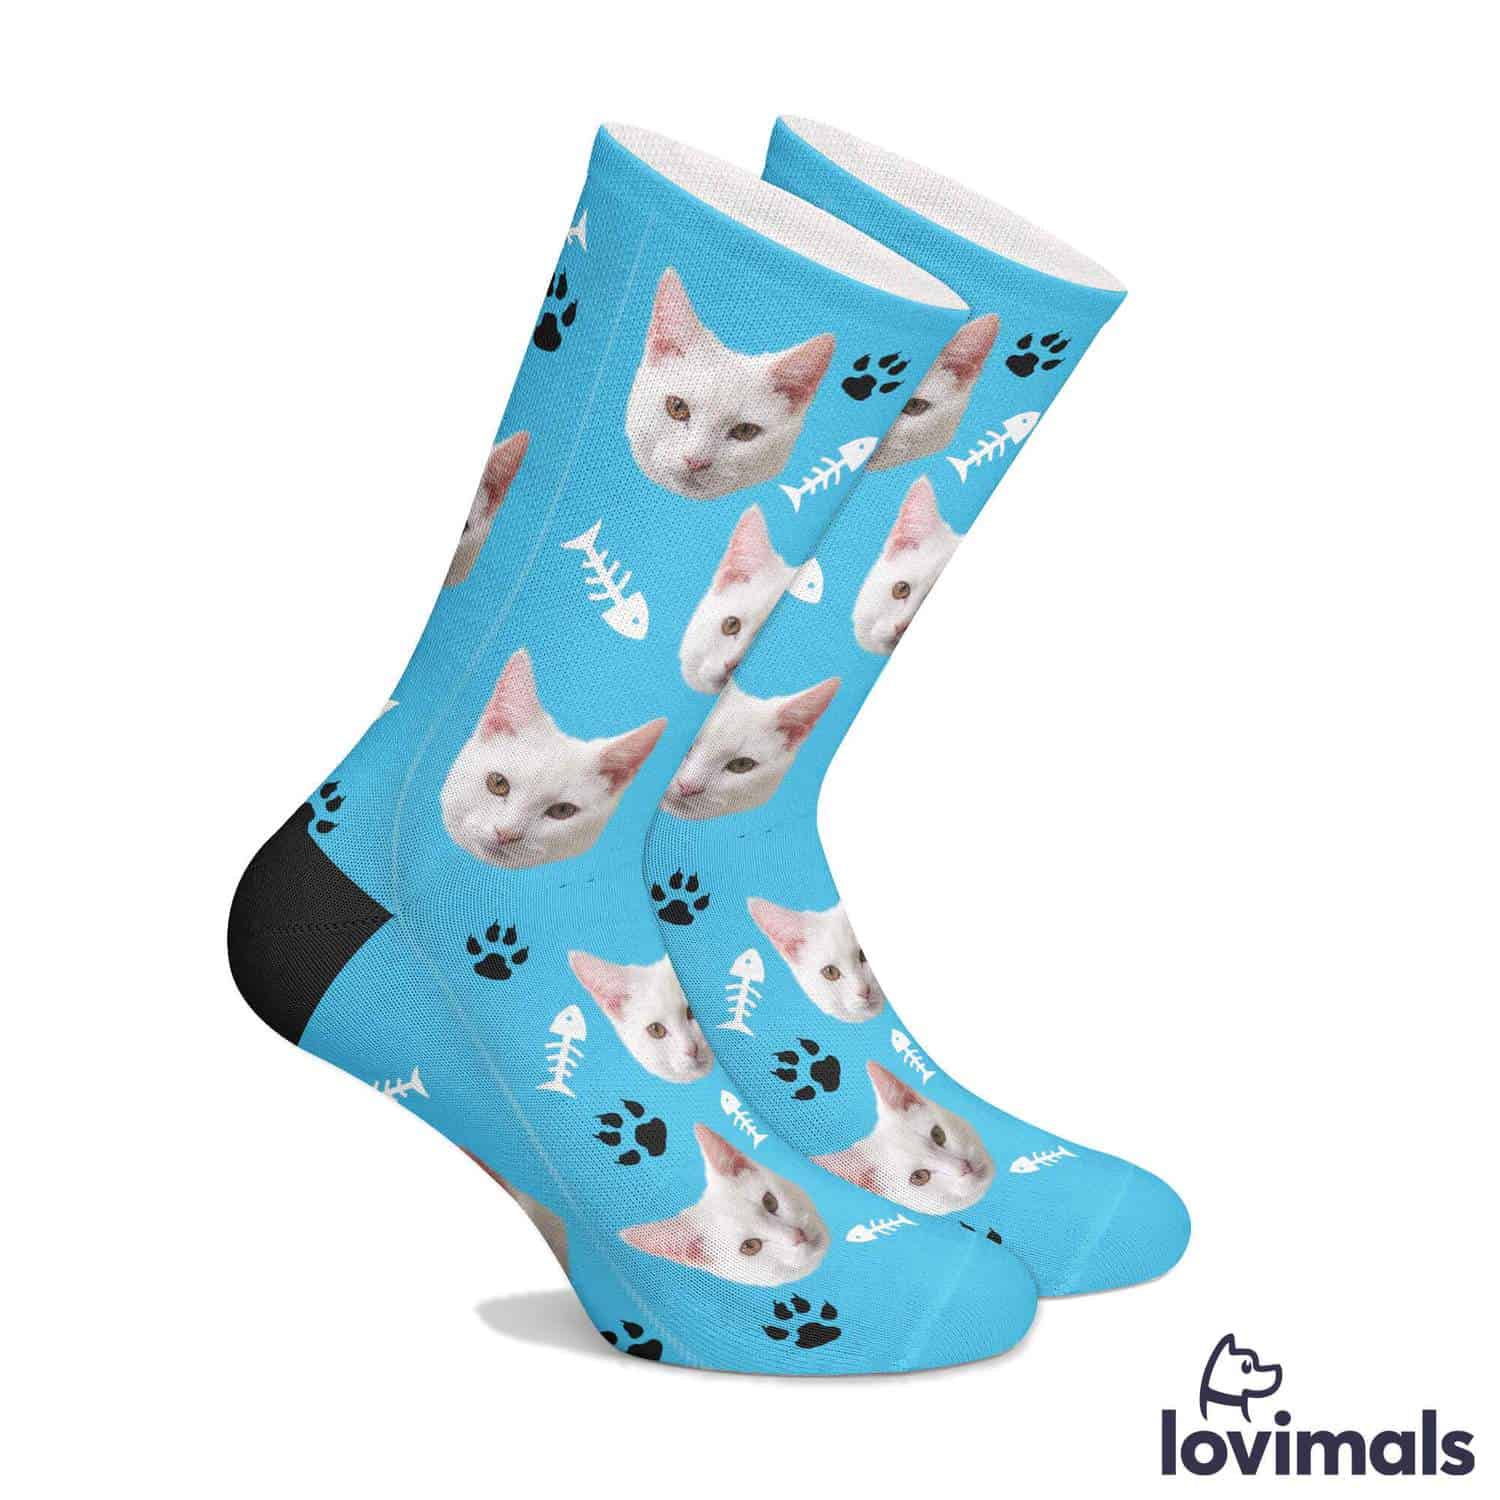 Blue socks with cats heads, paw prints, and fish bones